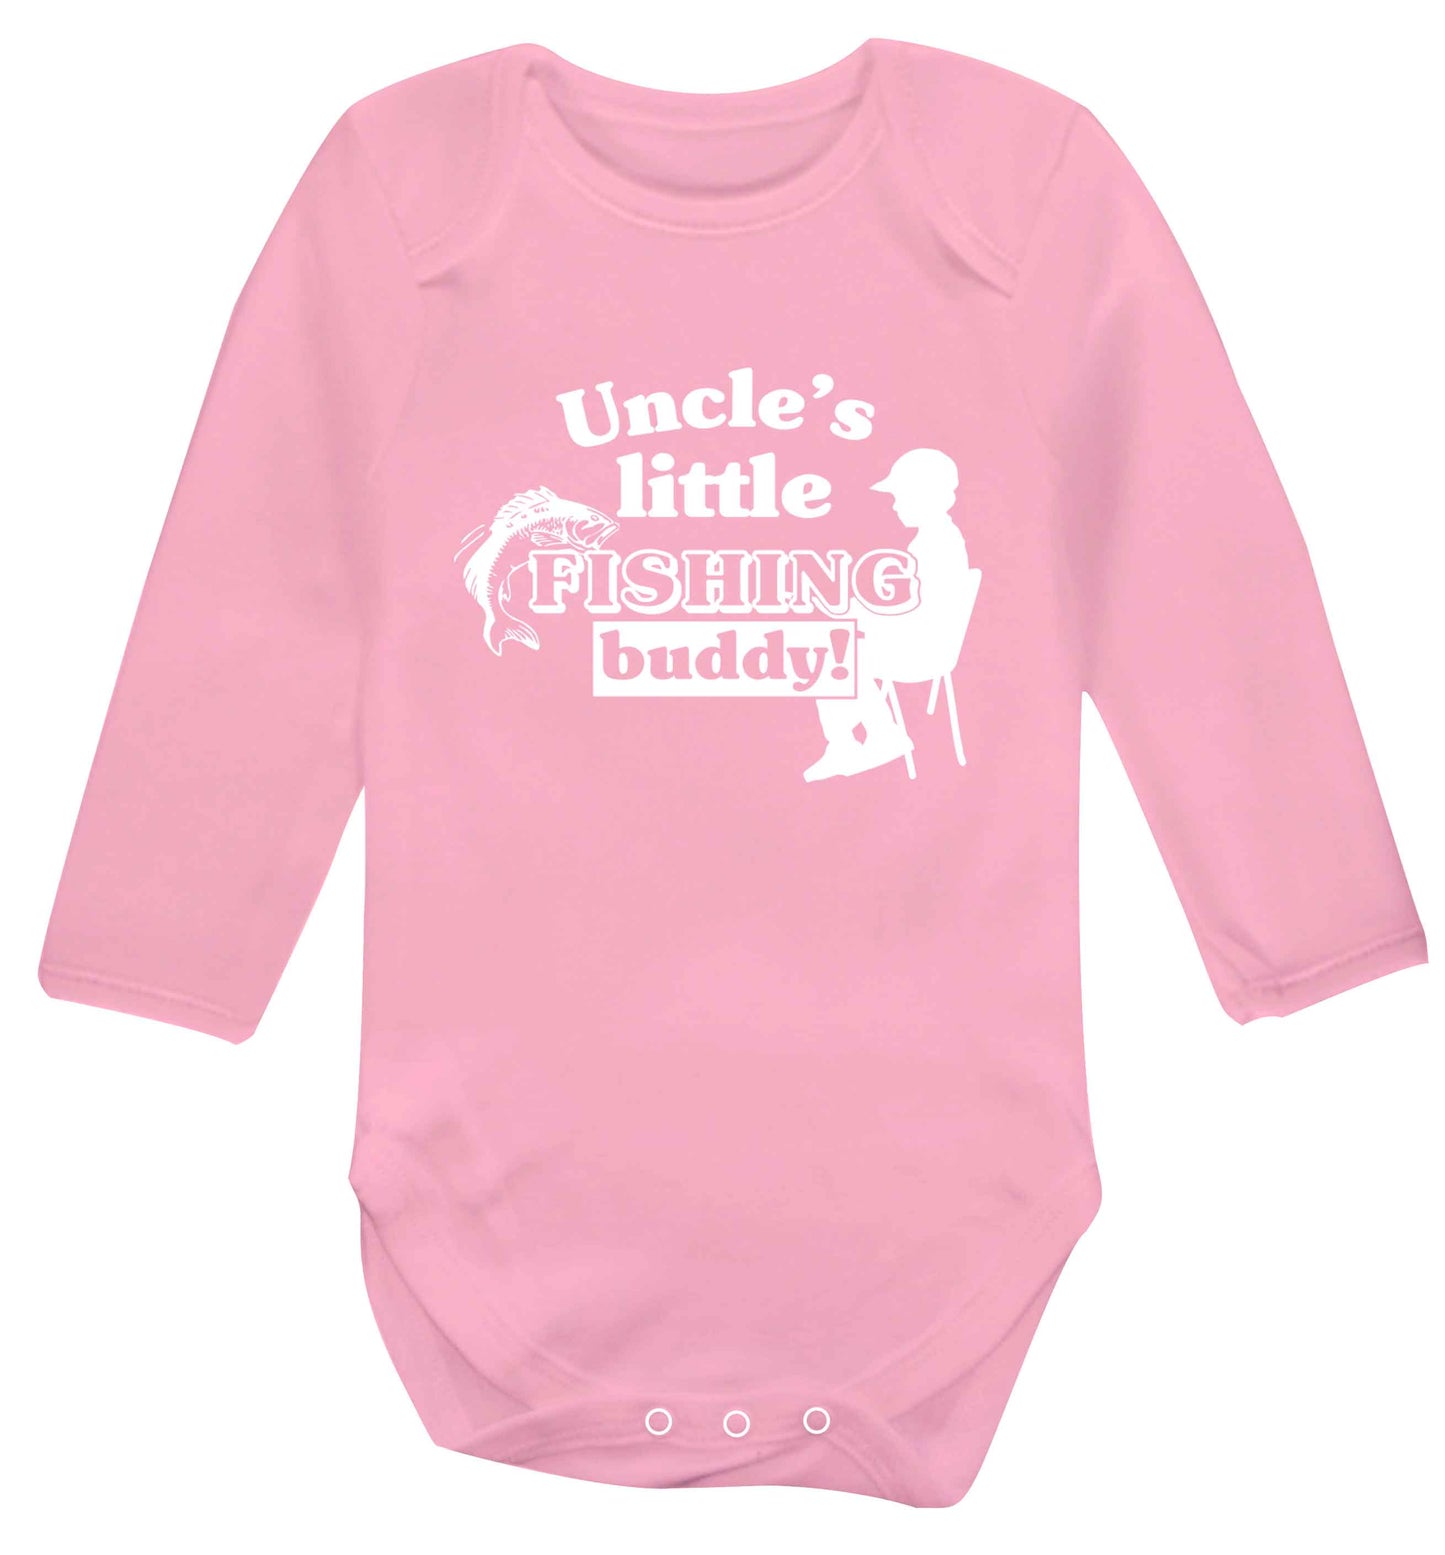 Uncle's little fishing buddy Baby Vest long sleeved pale pink 6-12 months